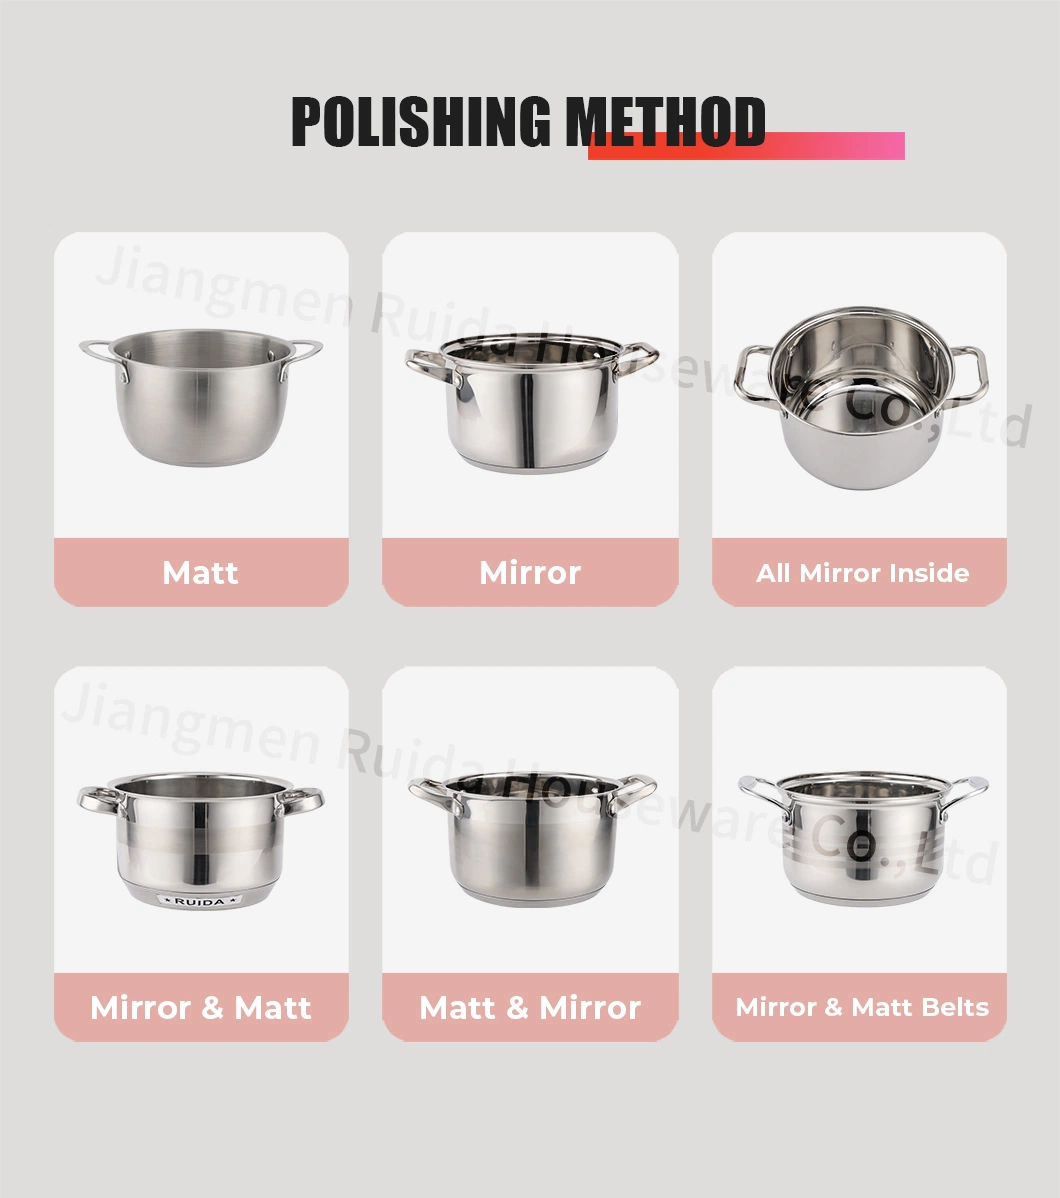 Hot Selling Stainless Steel Casserole Saucepan Cooking Pot Kitchenware with Lid